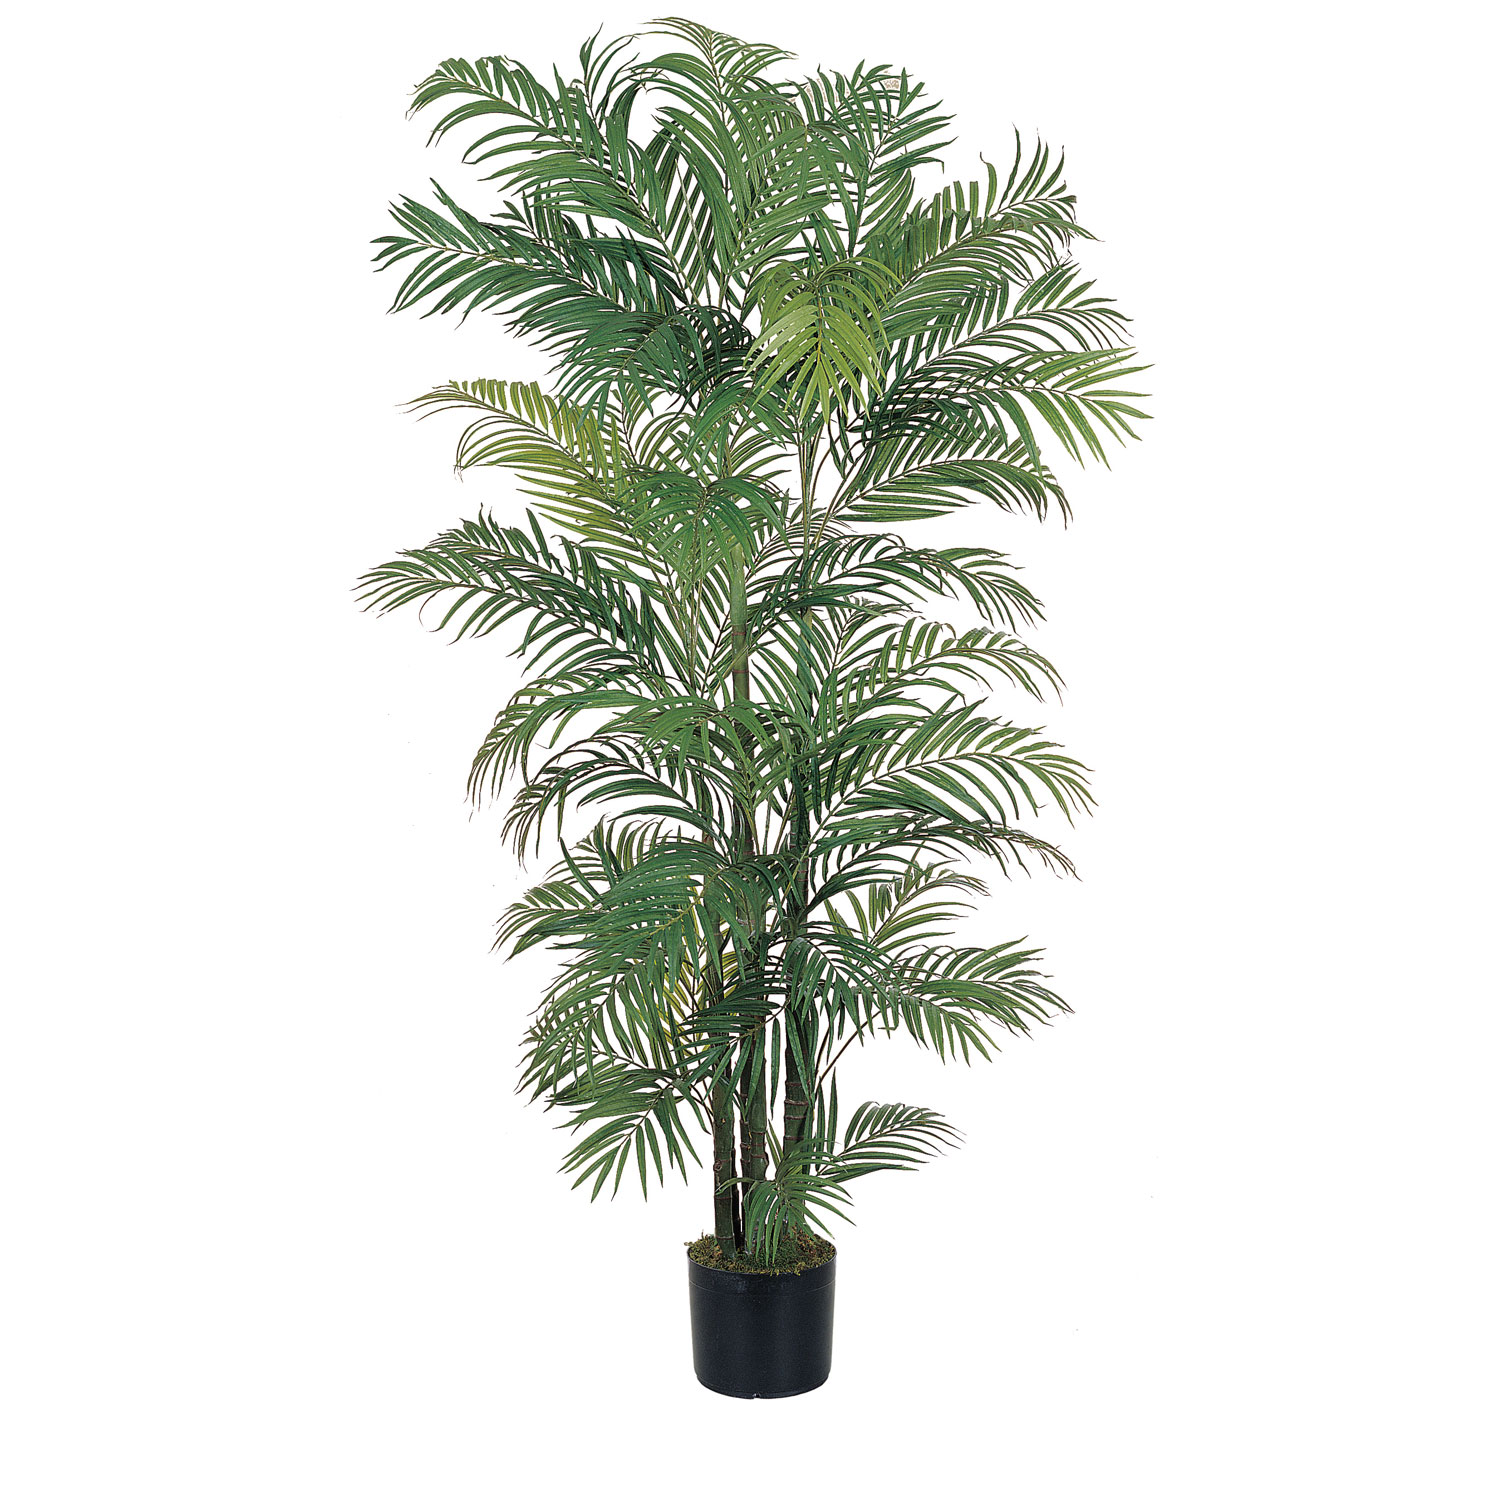 6 Foot Artificial Areca Palm Tree: Potted